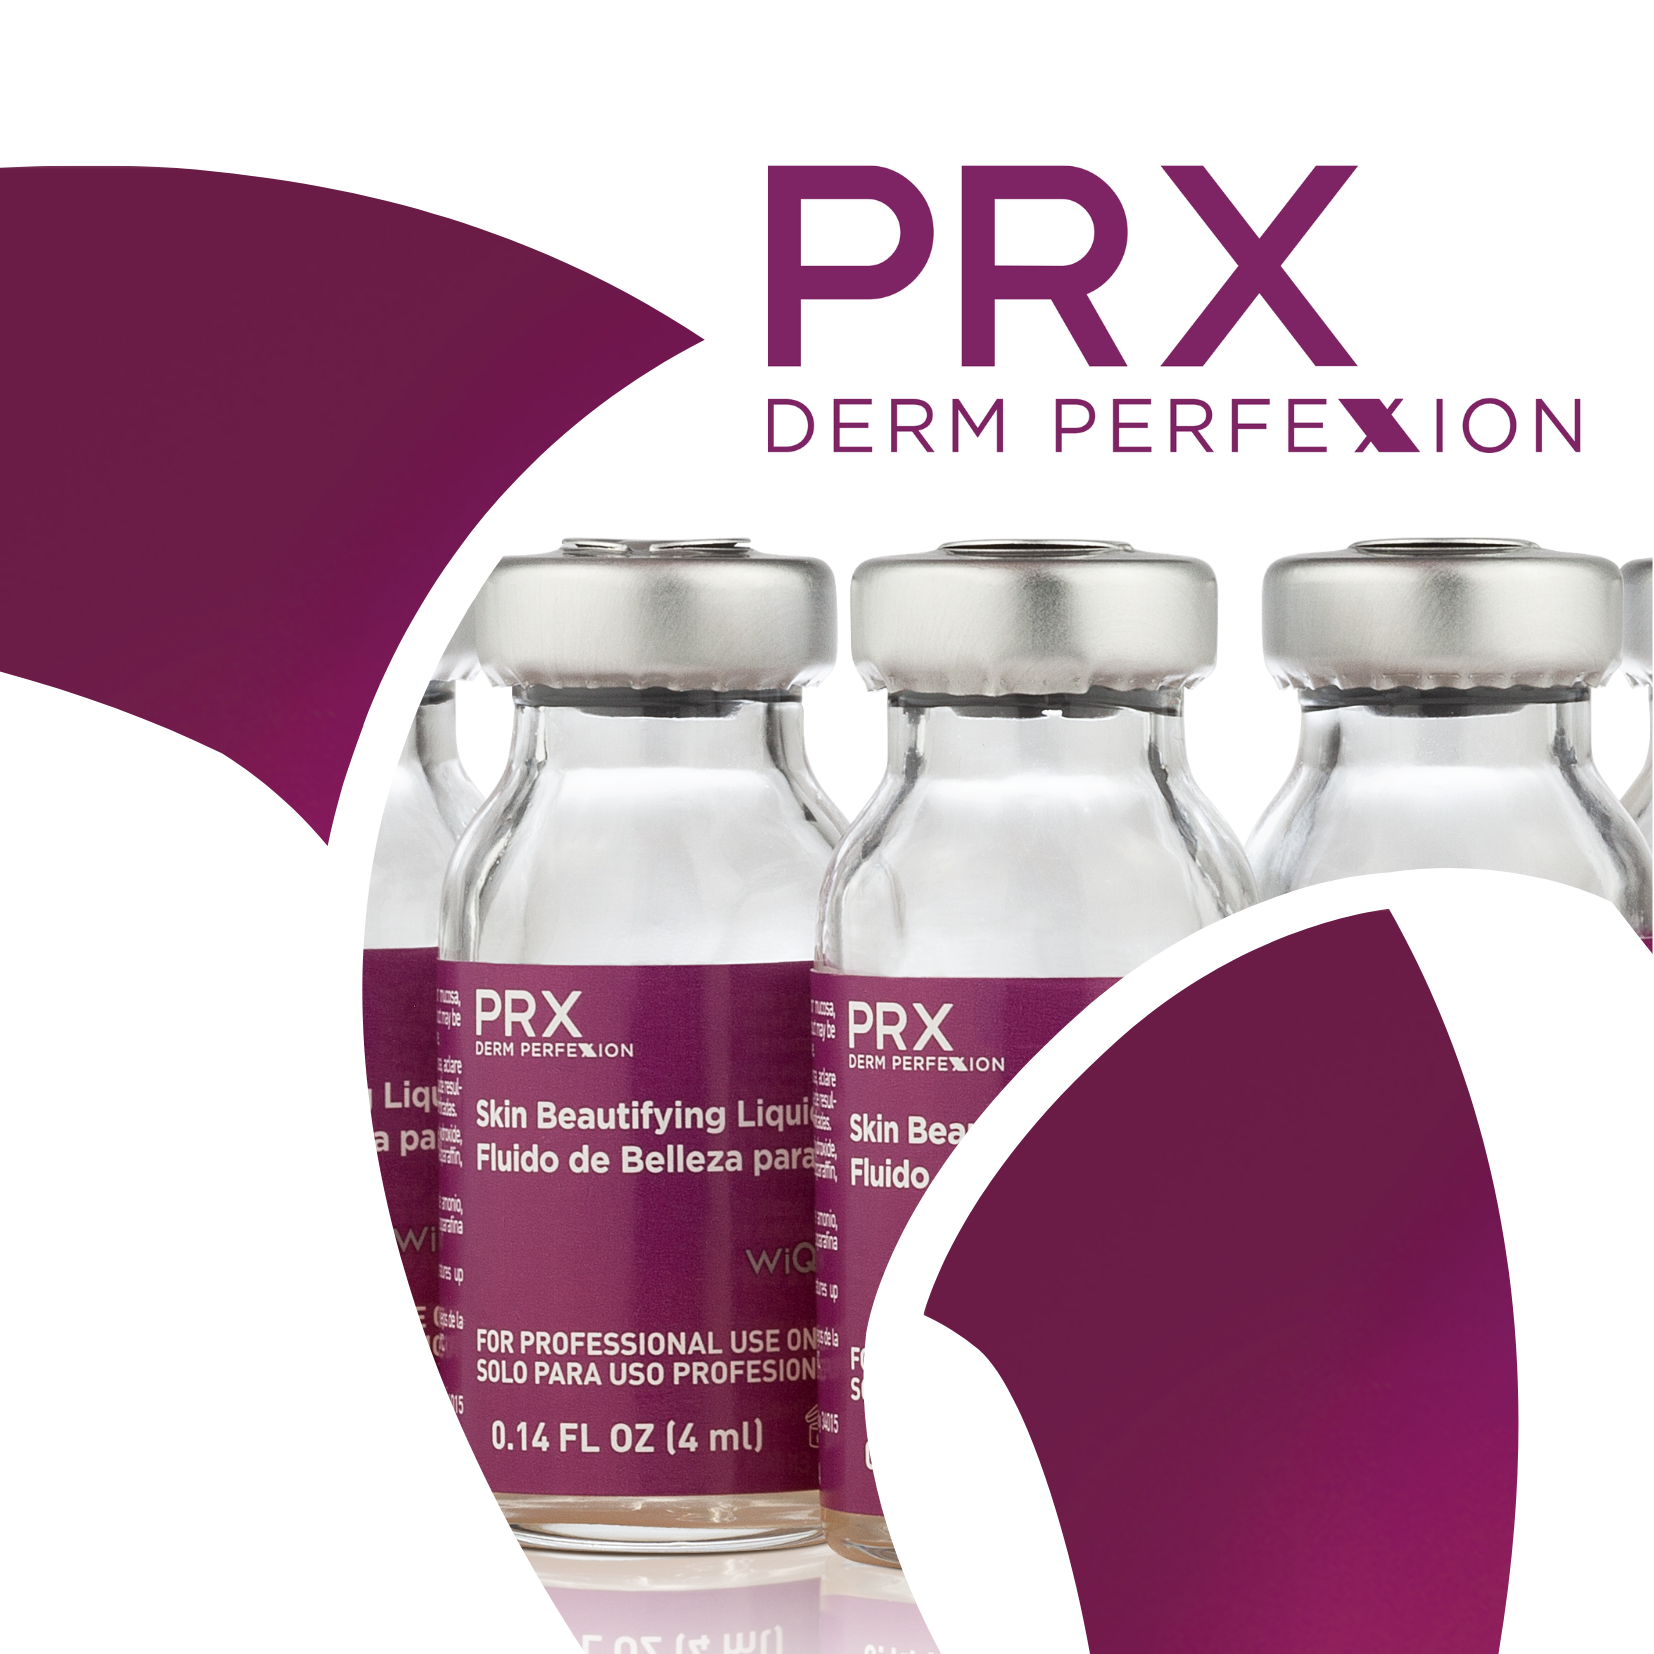 PRX-T33 Derm Perfexion Webinar: “Synergy in action” master an advanced PRX DERM PERFEXION / Microneedling protocol